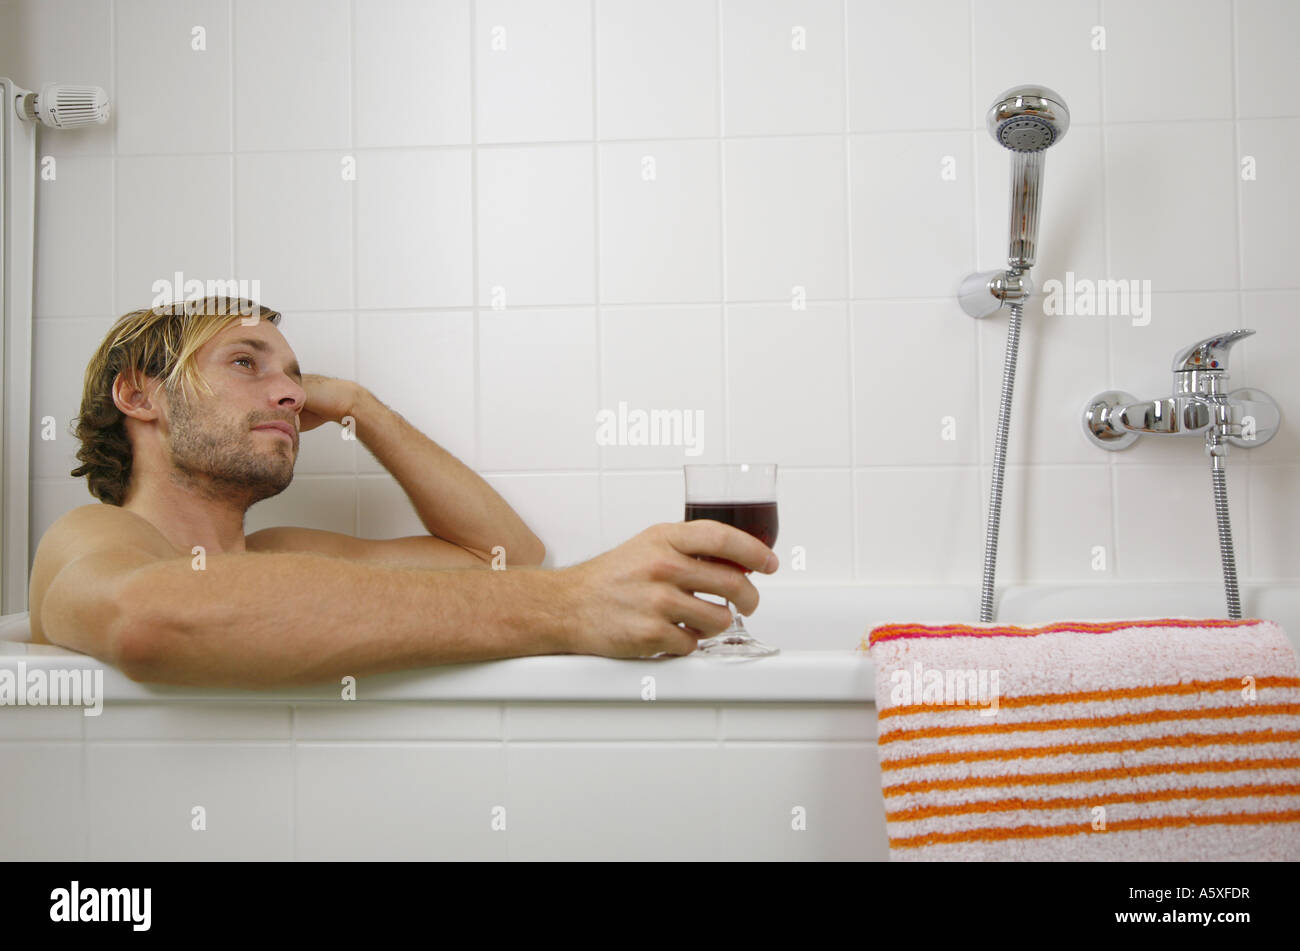 Young man leaning in bath tub holding wine glass close up Stock Photo